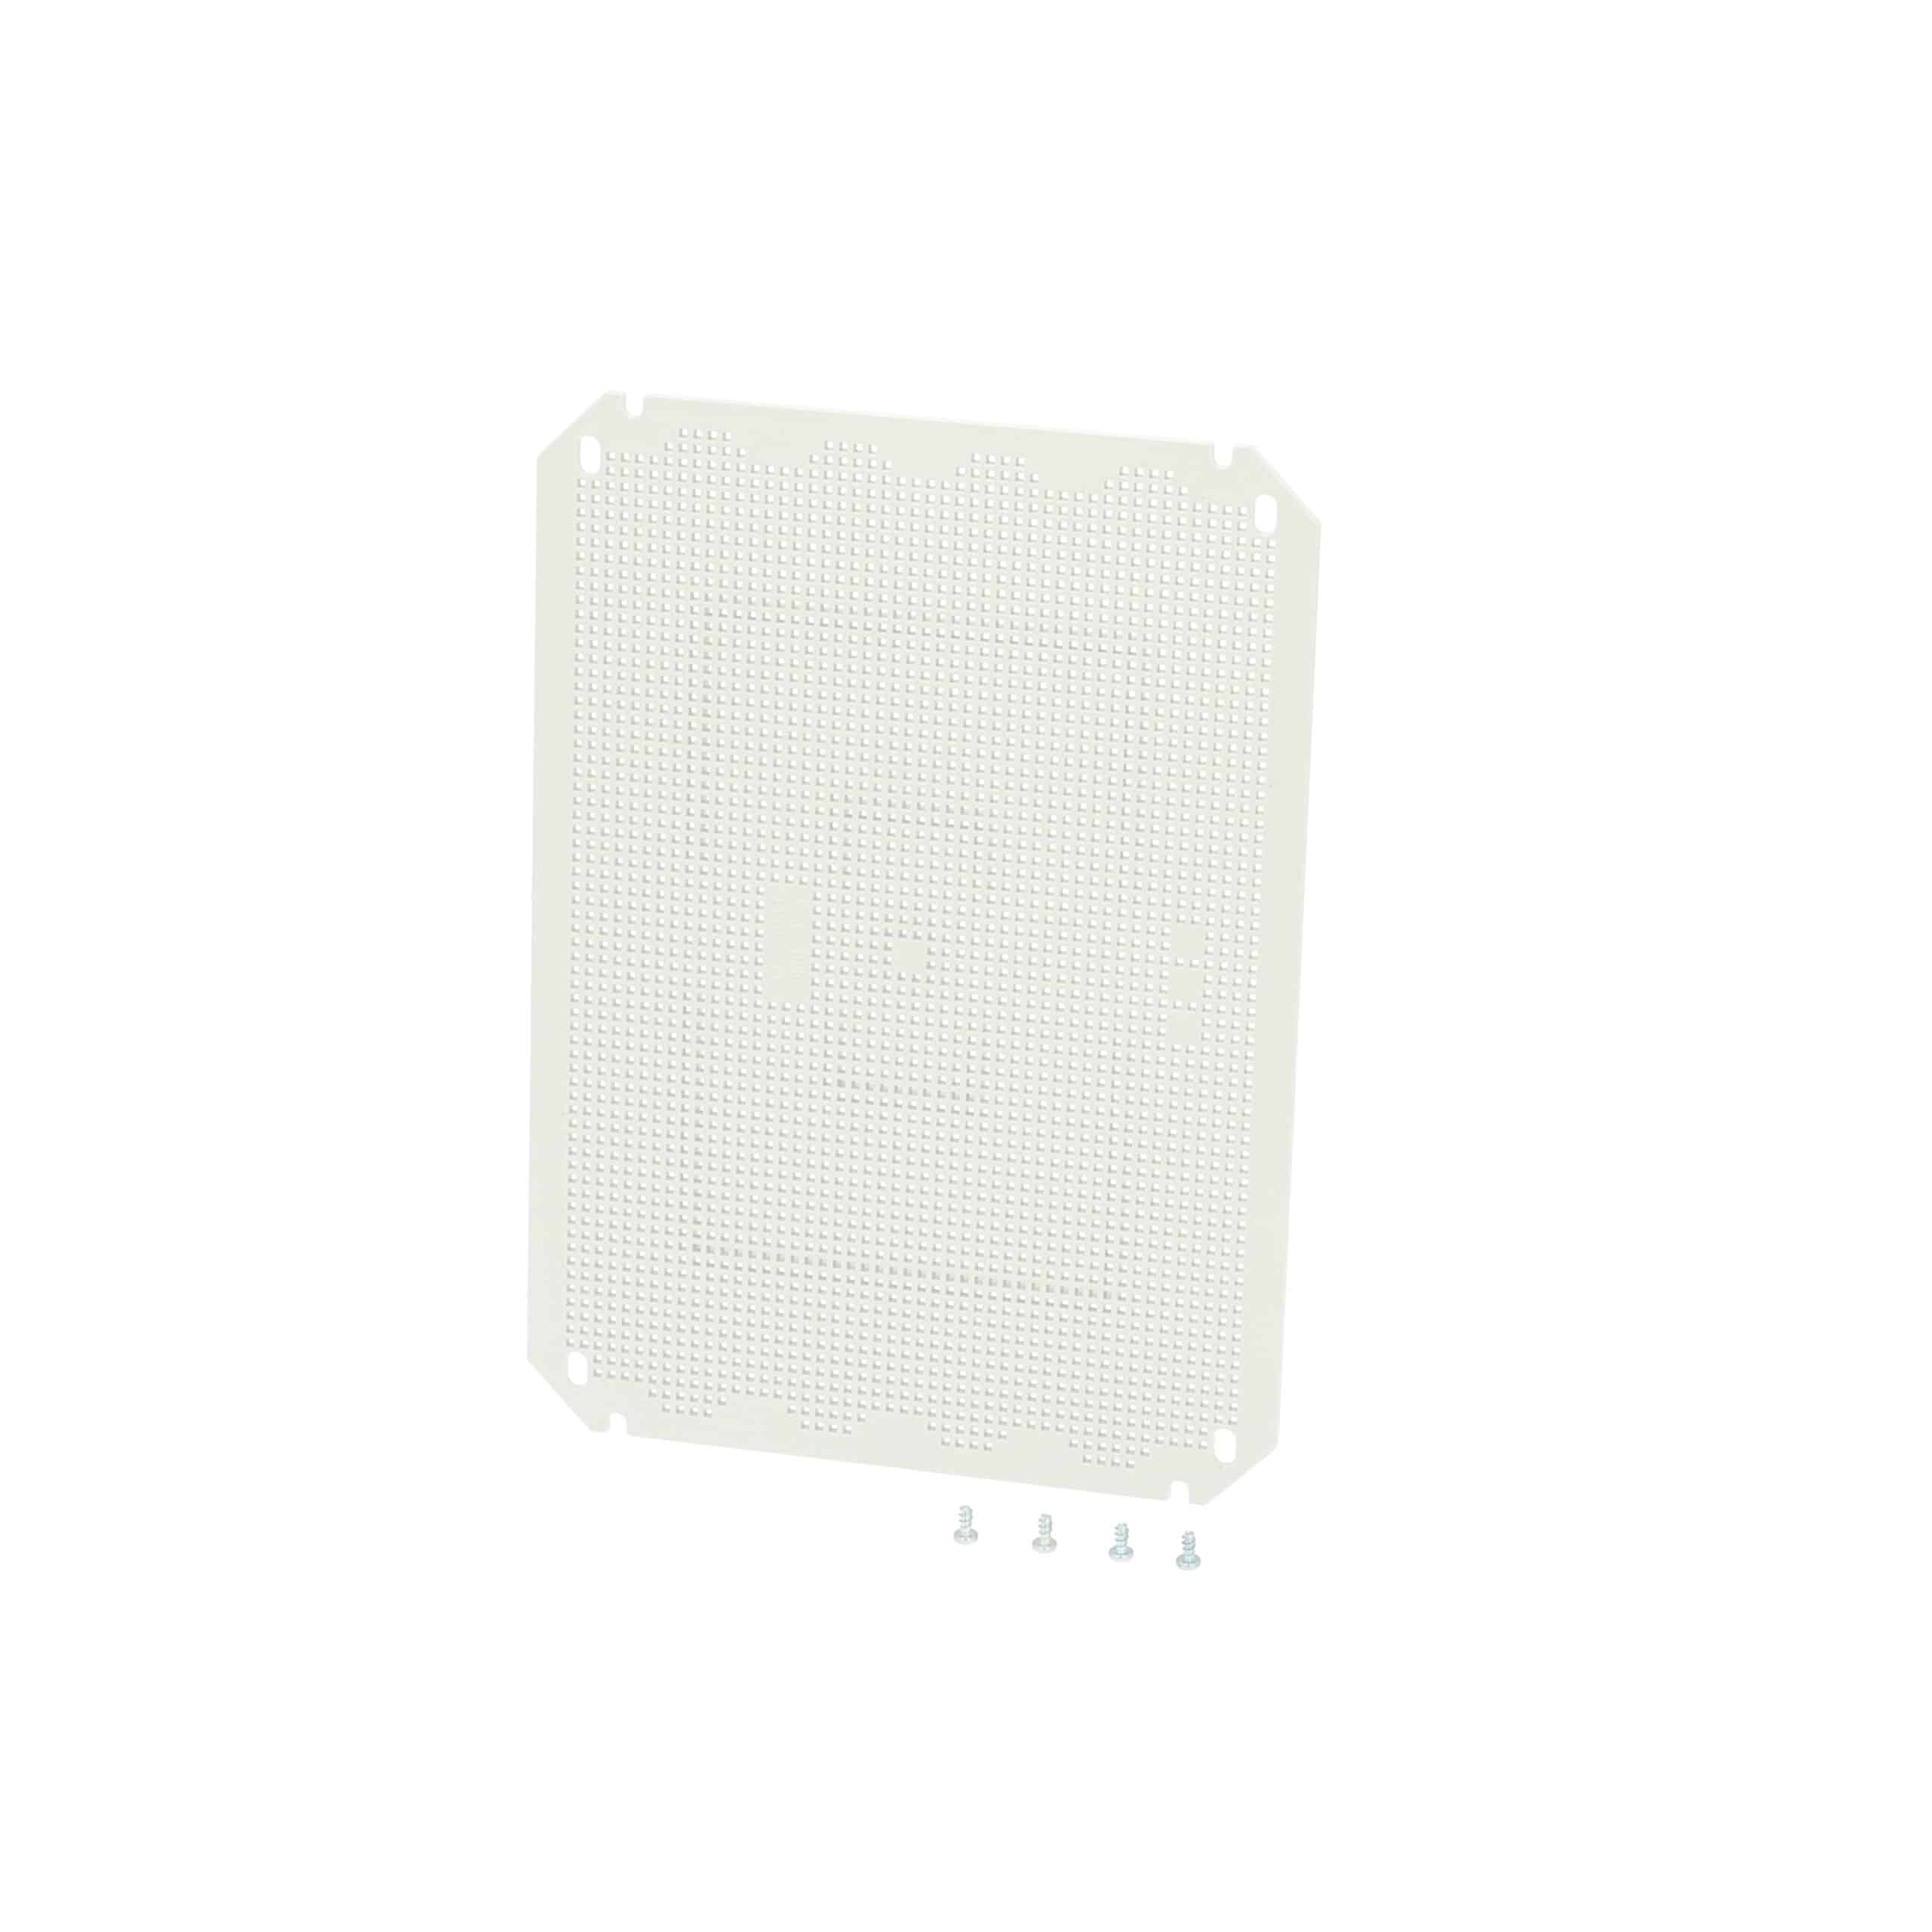 Fibox NEO perforated mounting plate 42mm x 32mm (4850042)